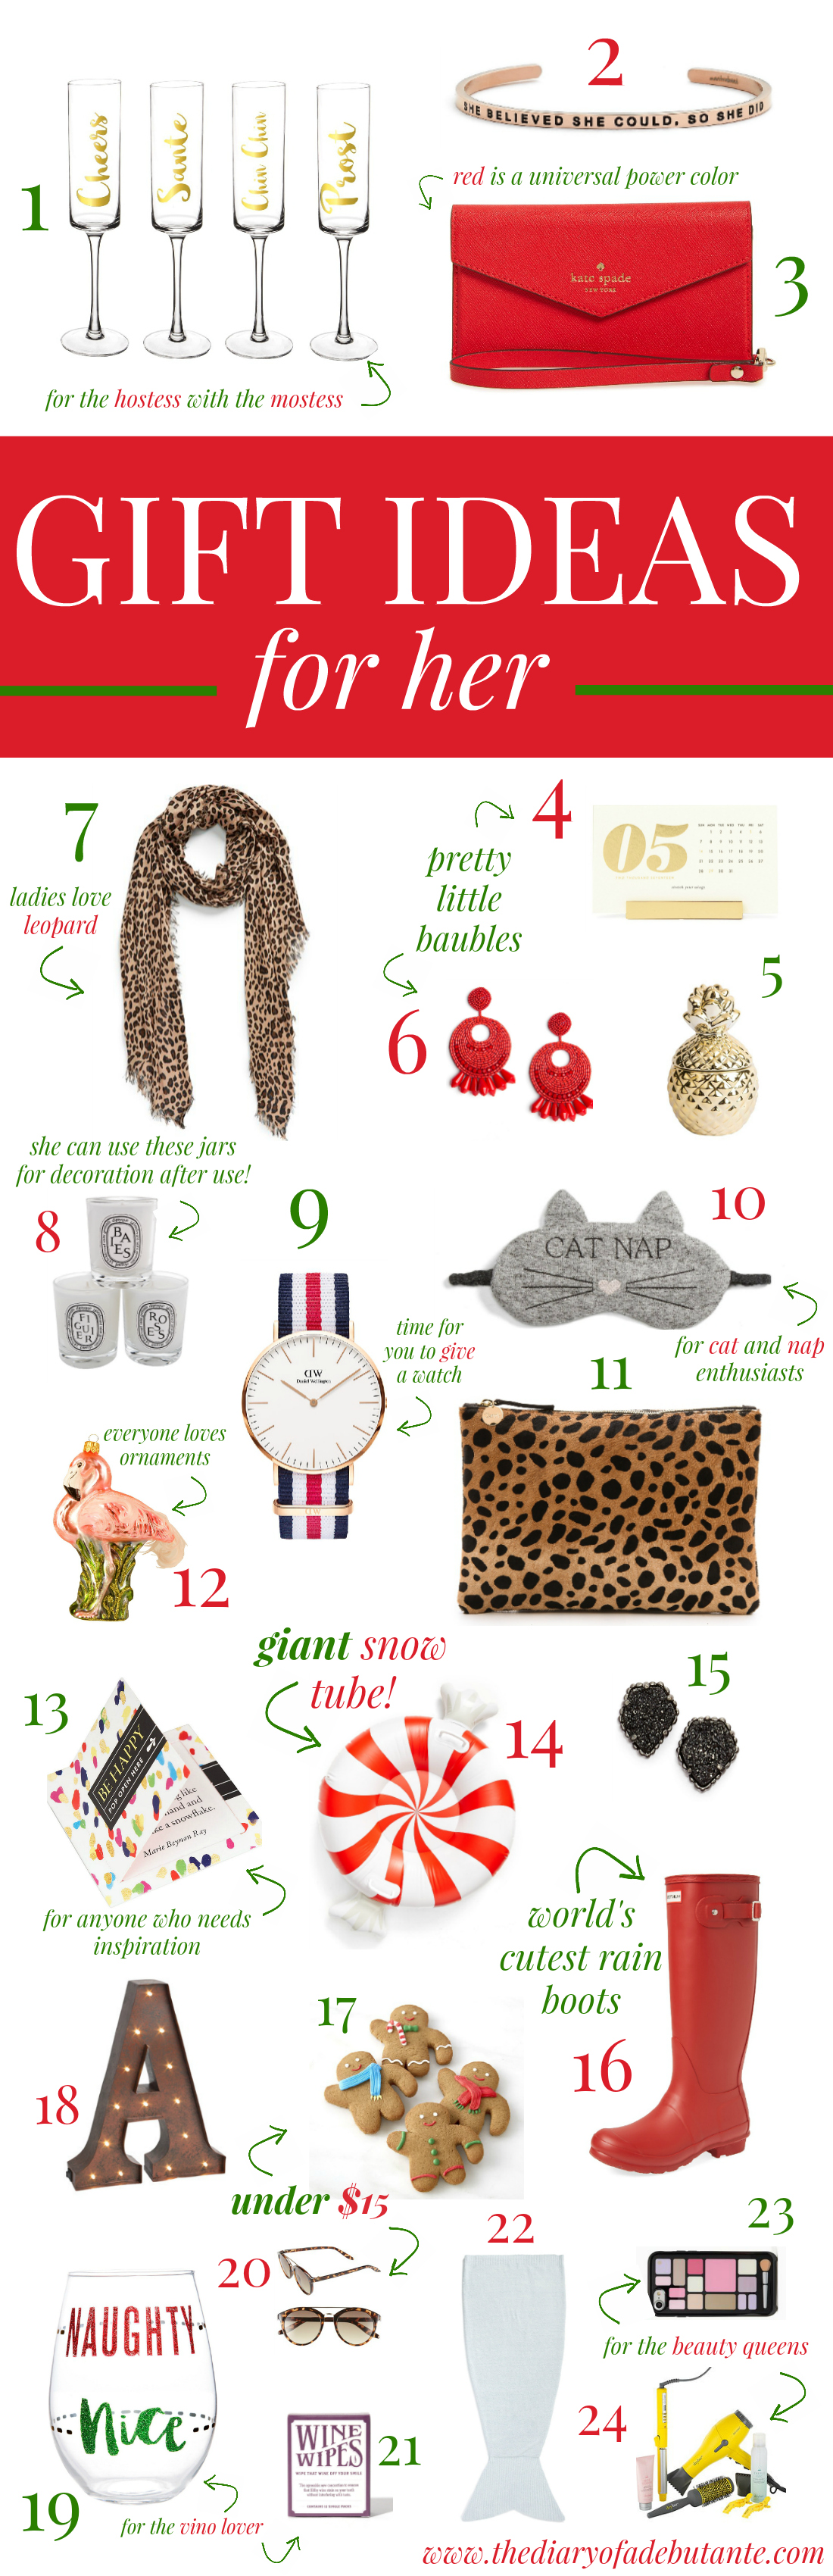 24 of the Best Christmas Gift Ideas for Her in 2016 Diary of a Debutante